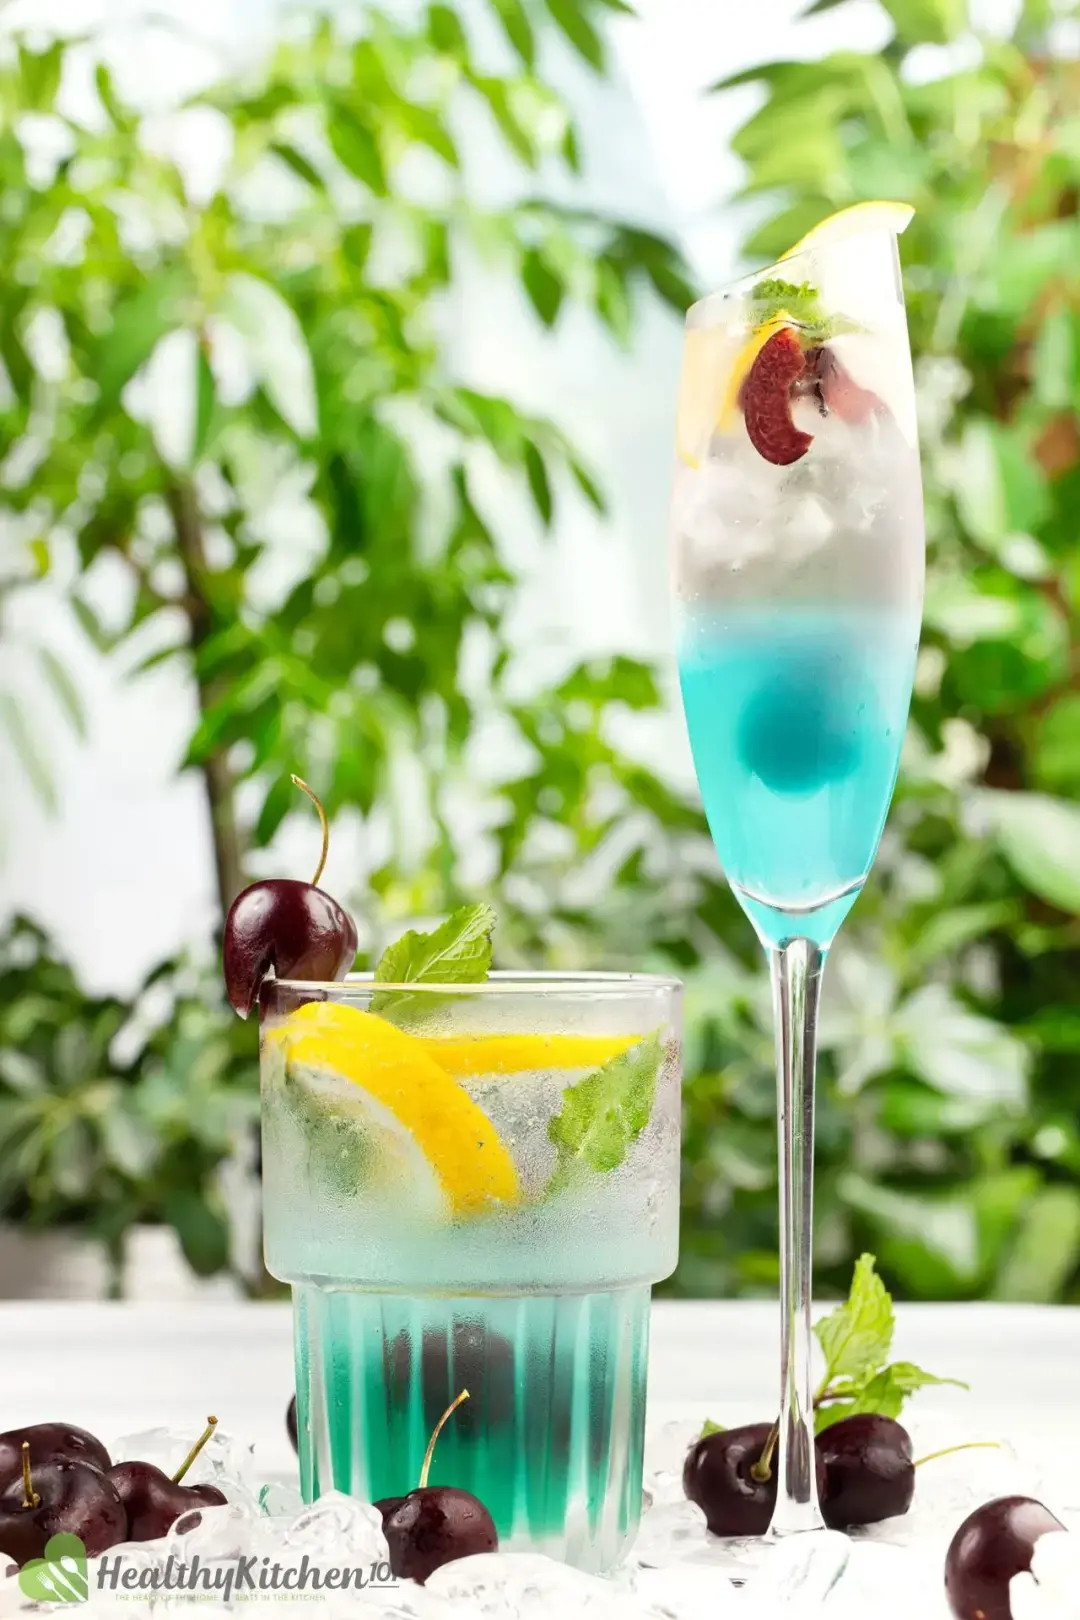 Cocktail glasses of a cyan-hued drink, topped with cherries and lemon wedges